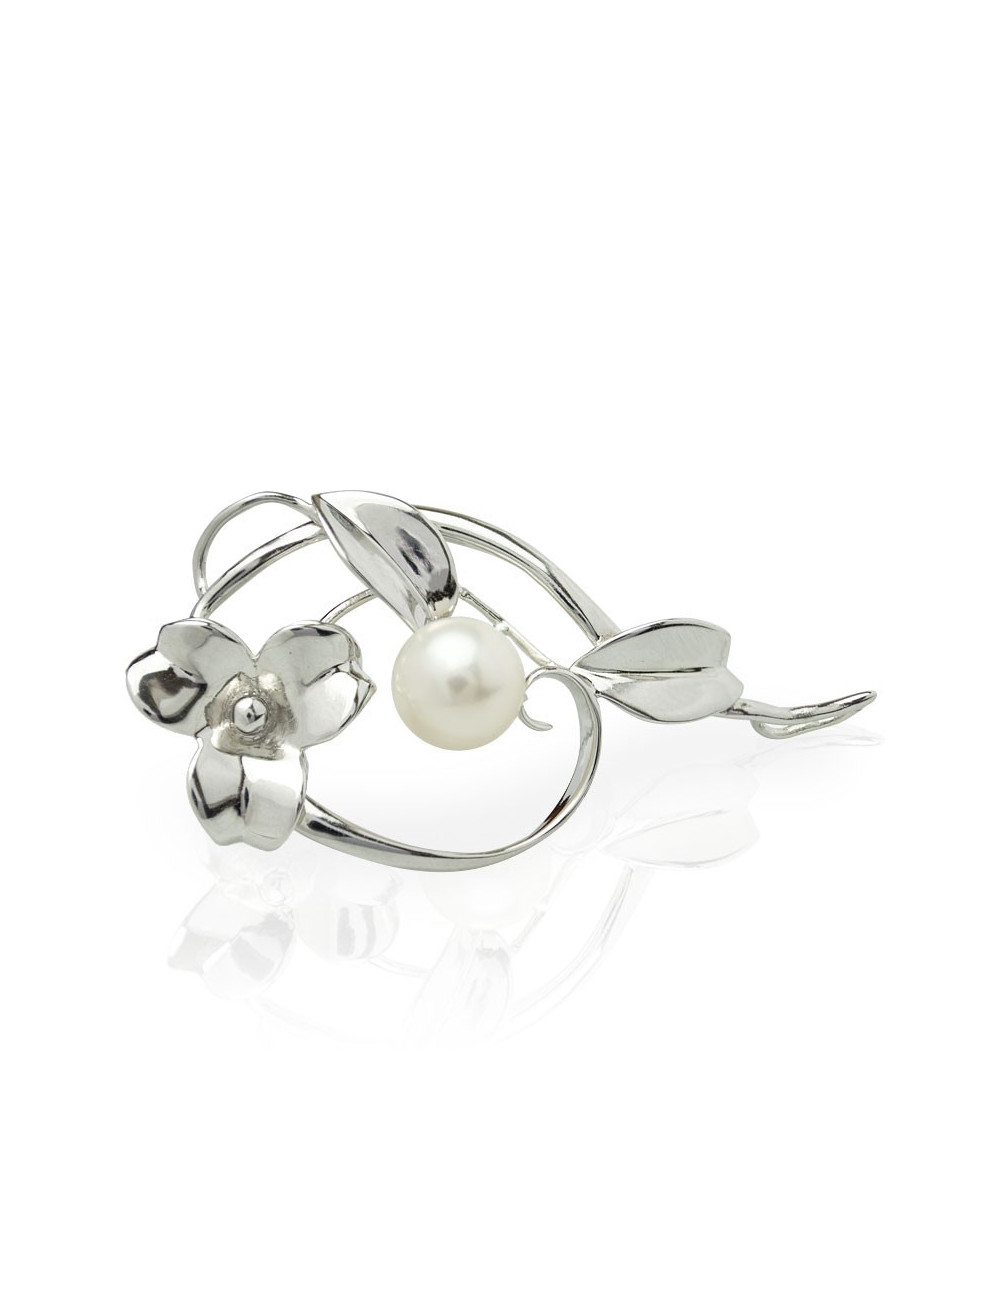 Silver brooch with freshwater pearls IP8090S